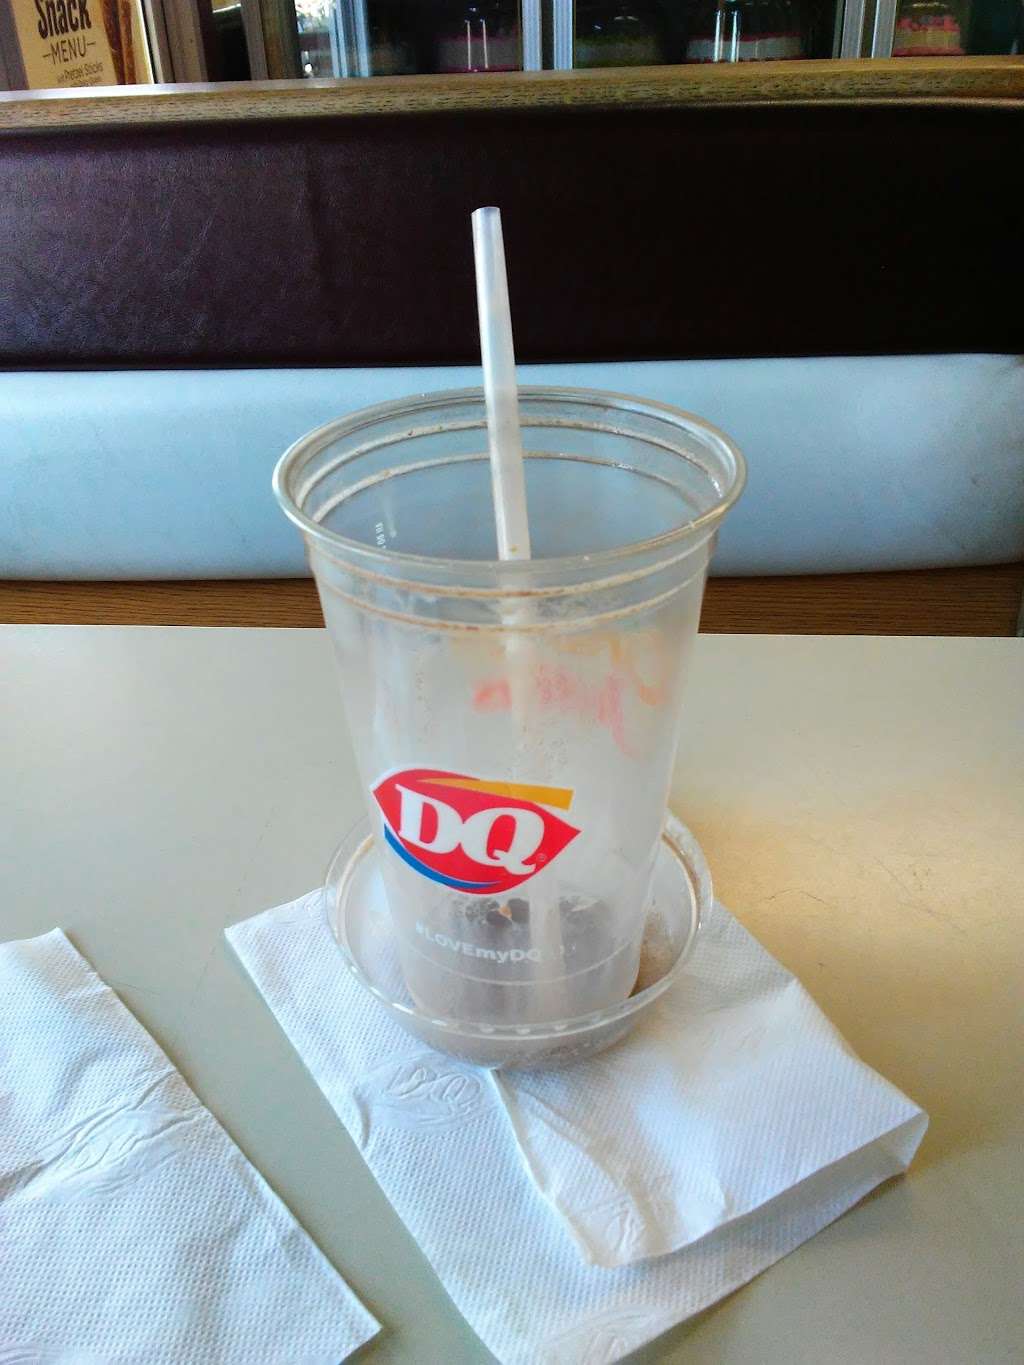 Dairy Queen | 345 W Main St, Trappe, PA 19426 | Phone: (610) 489-5548